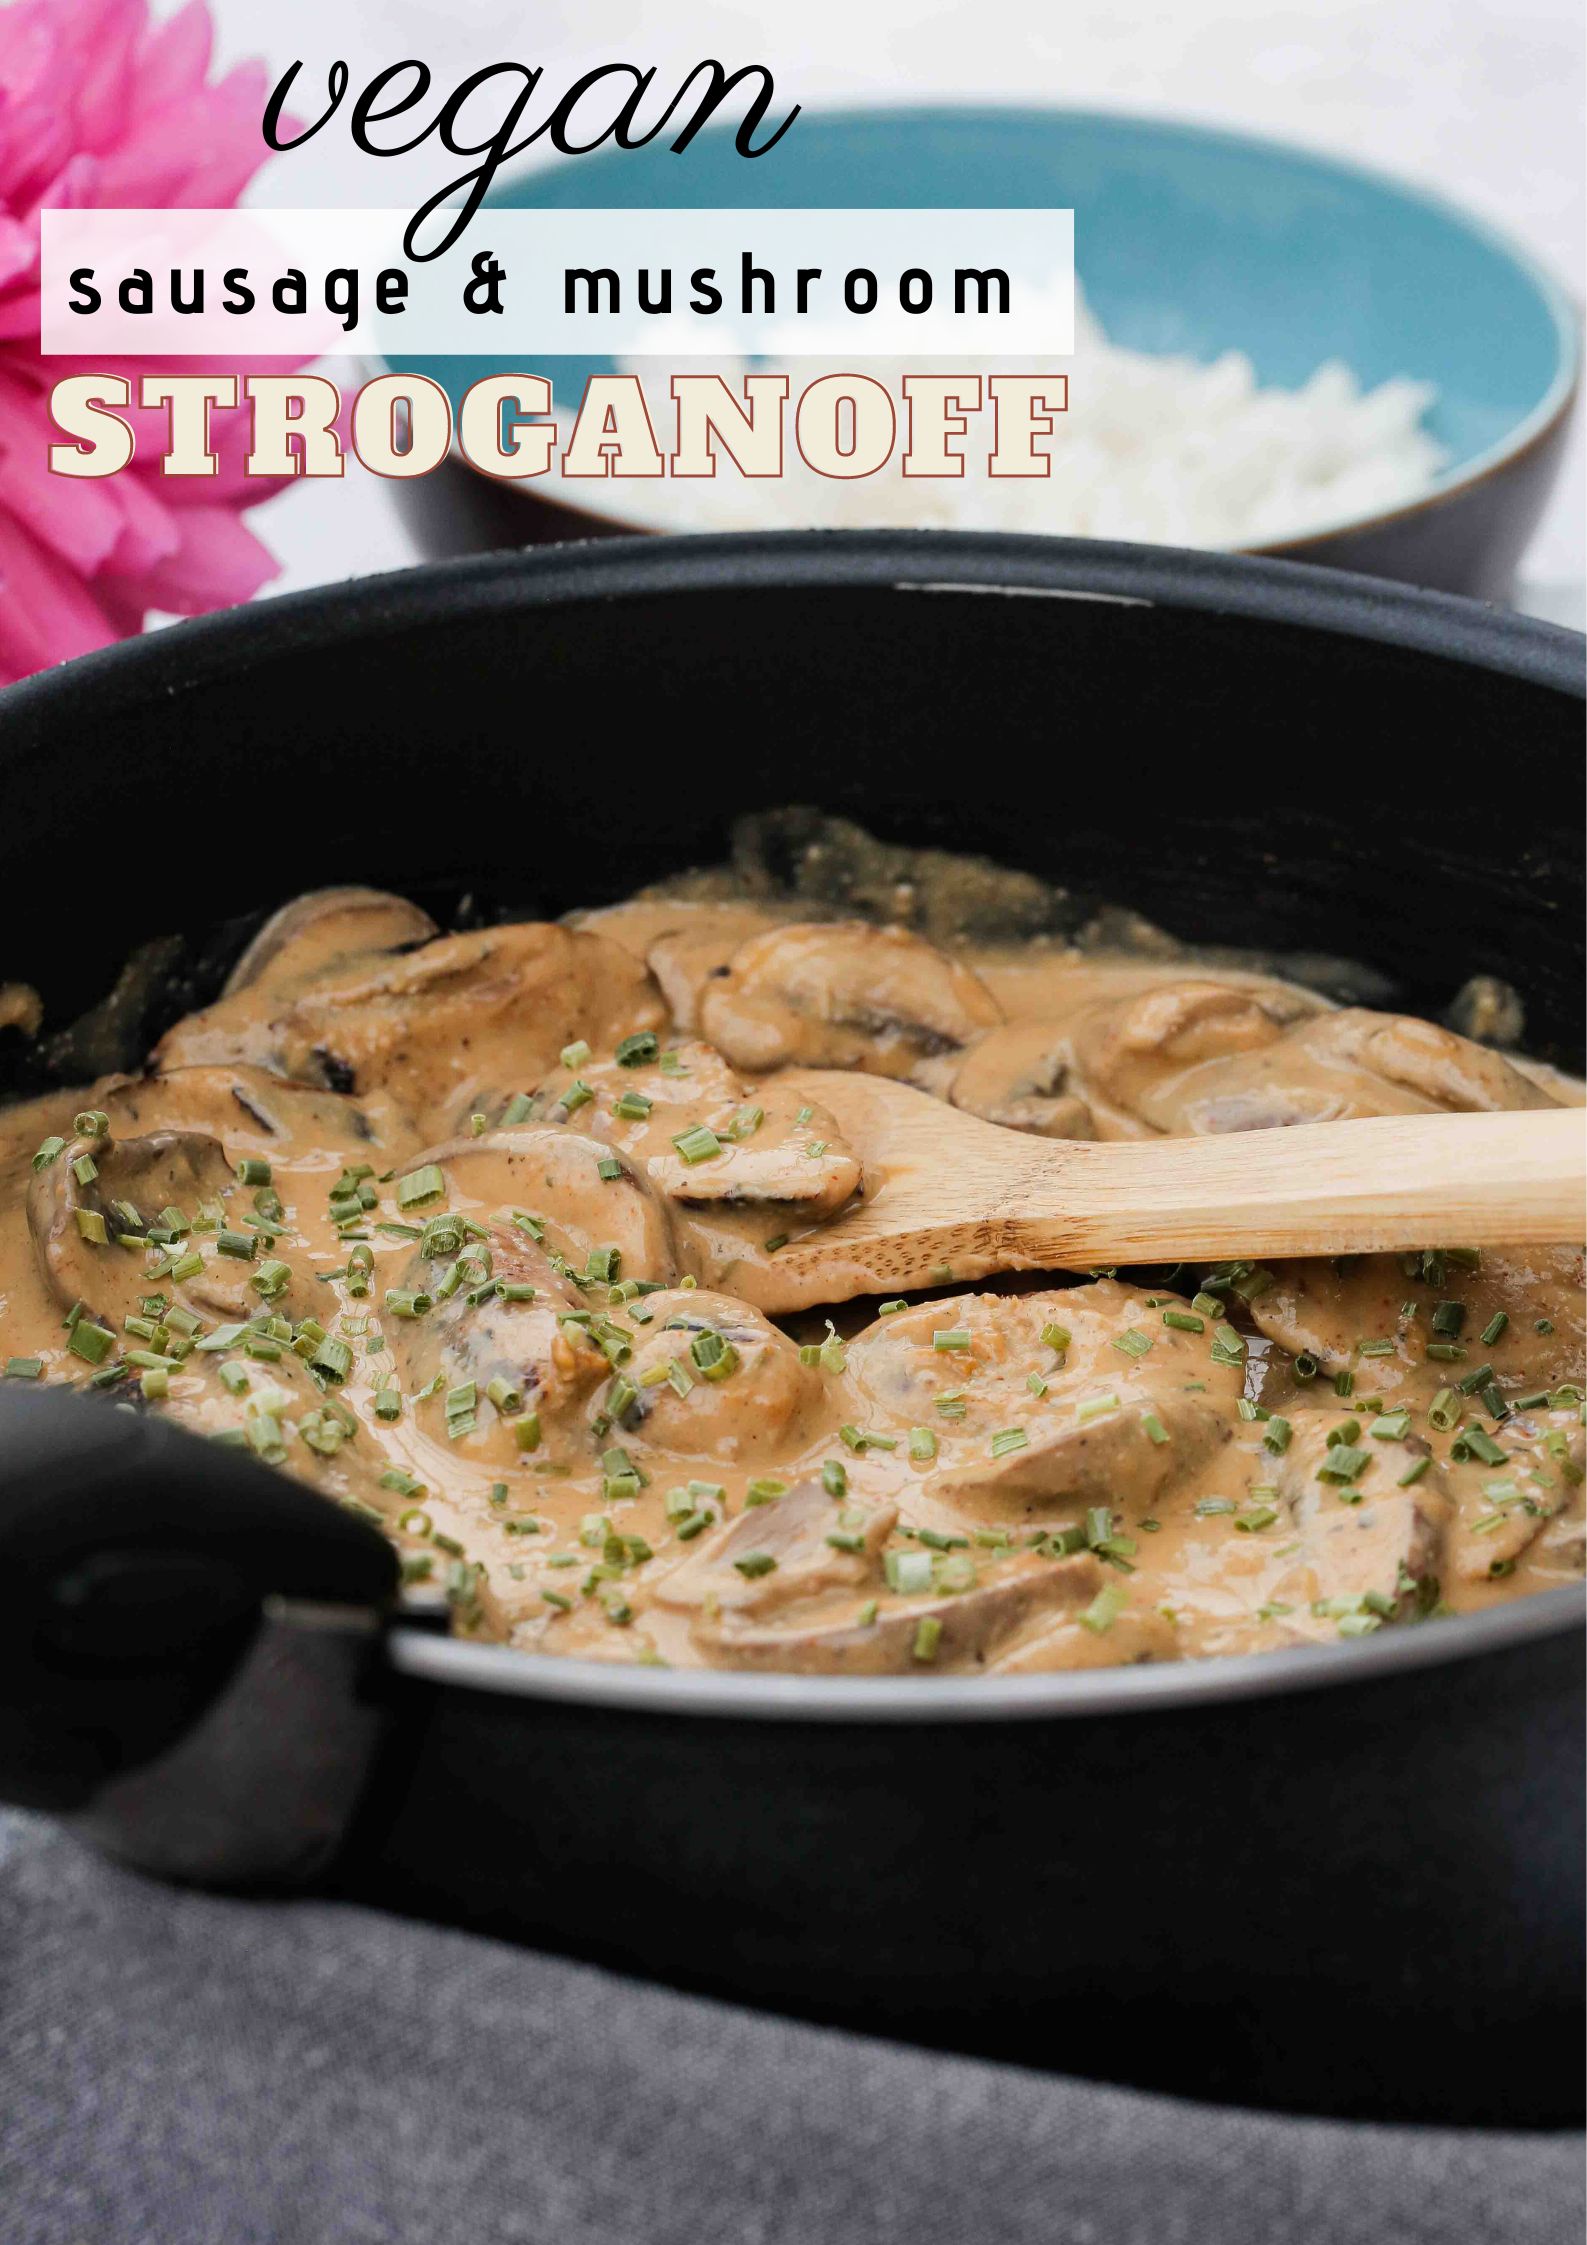 Creamy, full of flavour and SO tasty, this vegan mushroom stroganoff is made all in one pan for a speedy meal that's perfect for lunch or dinner! It's rich, warm and hearty and totally delivers on flavour | Recipe on thecookandhim.com #stroganoff #veganstroganoff #mushroomstroganoff #veganrecipes #veganmeal #easyvegan